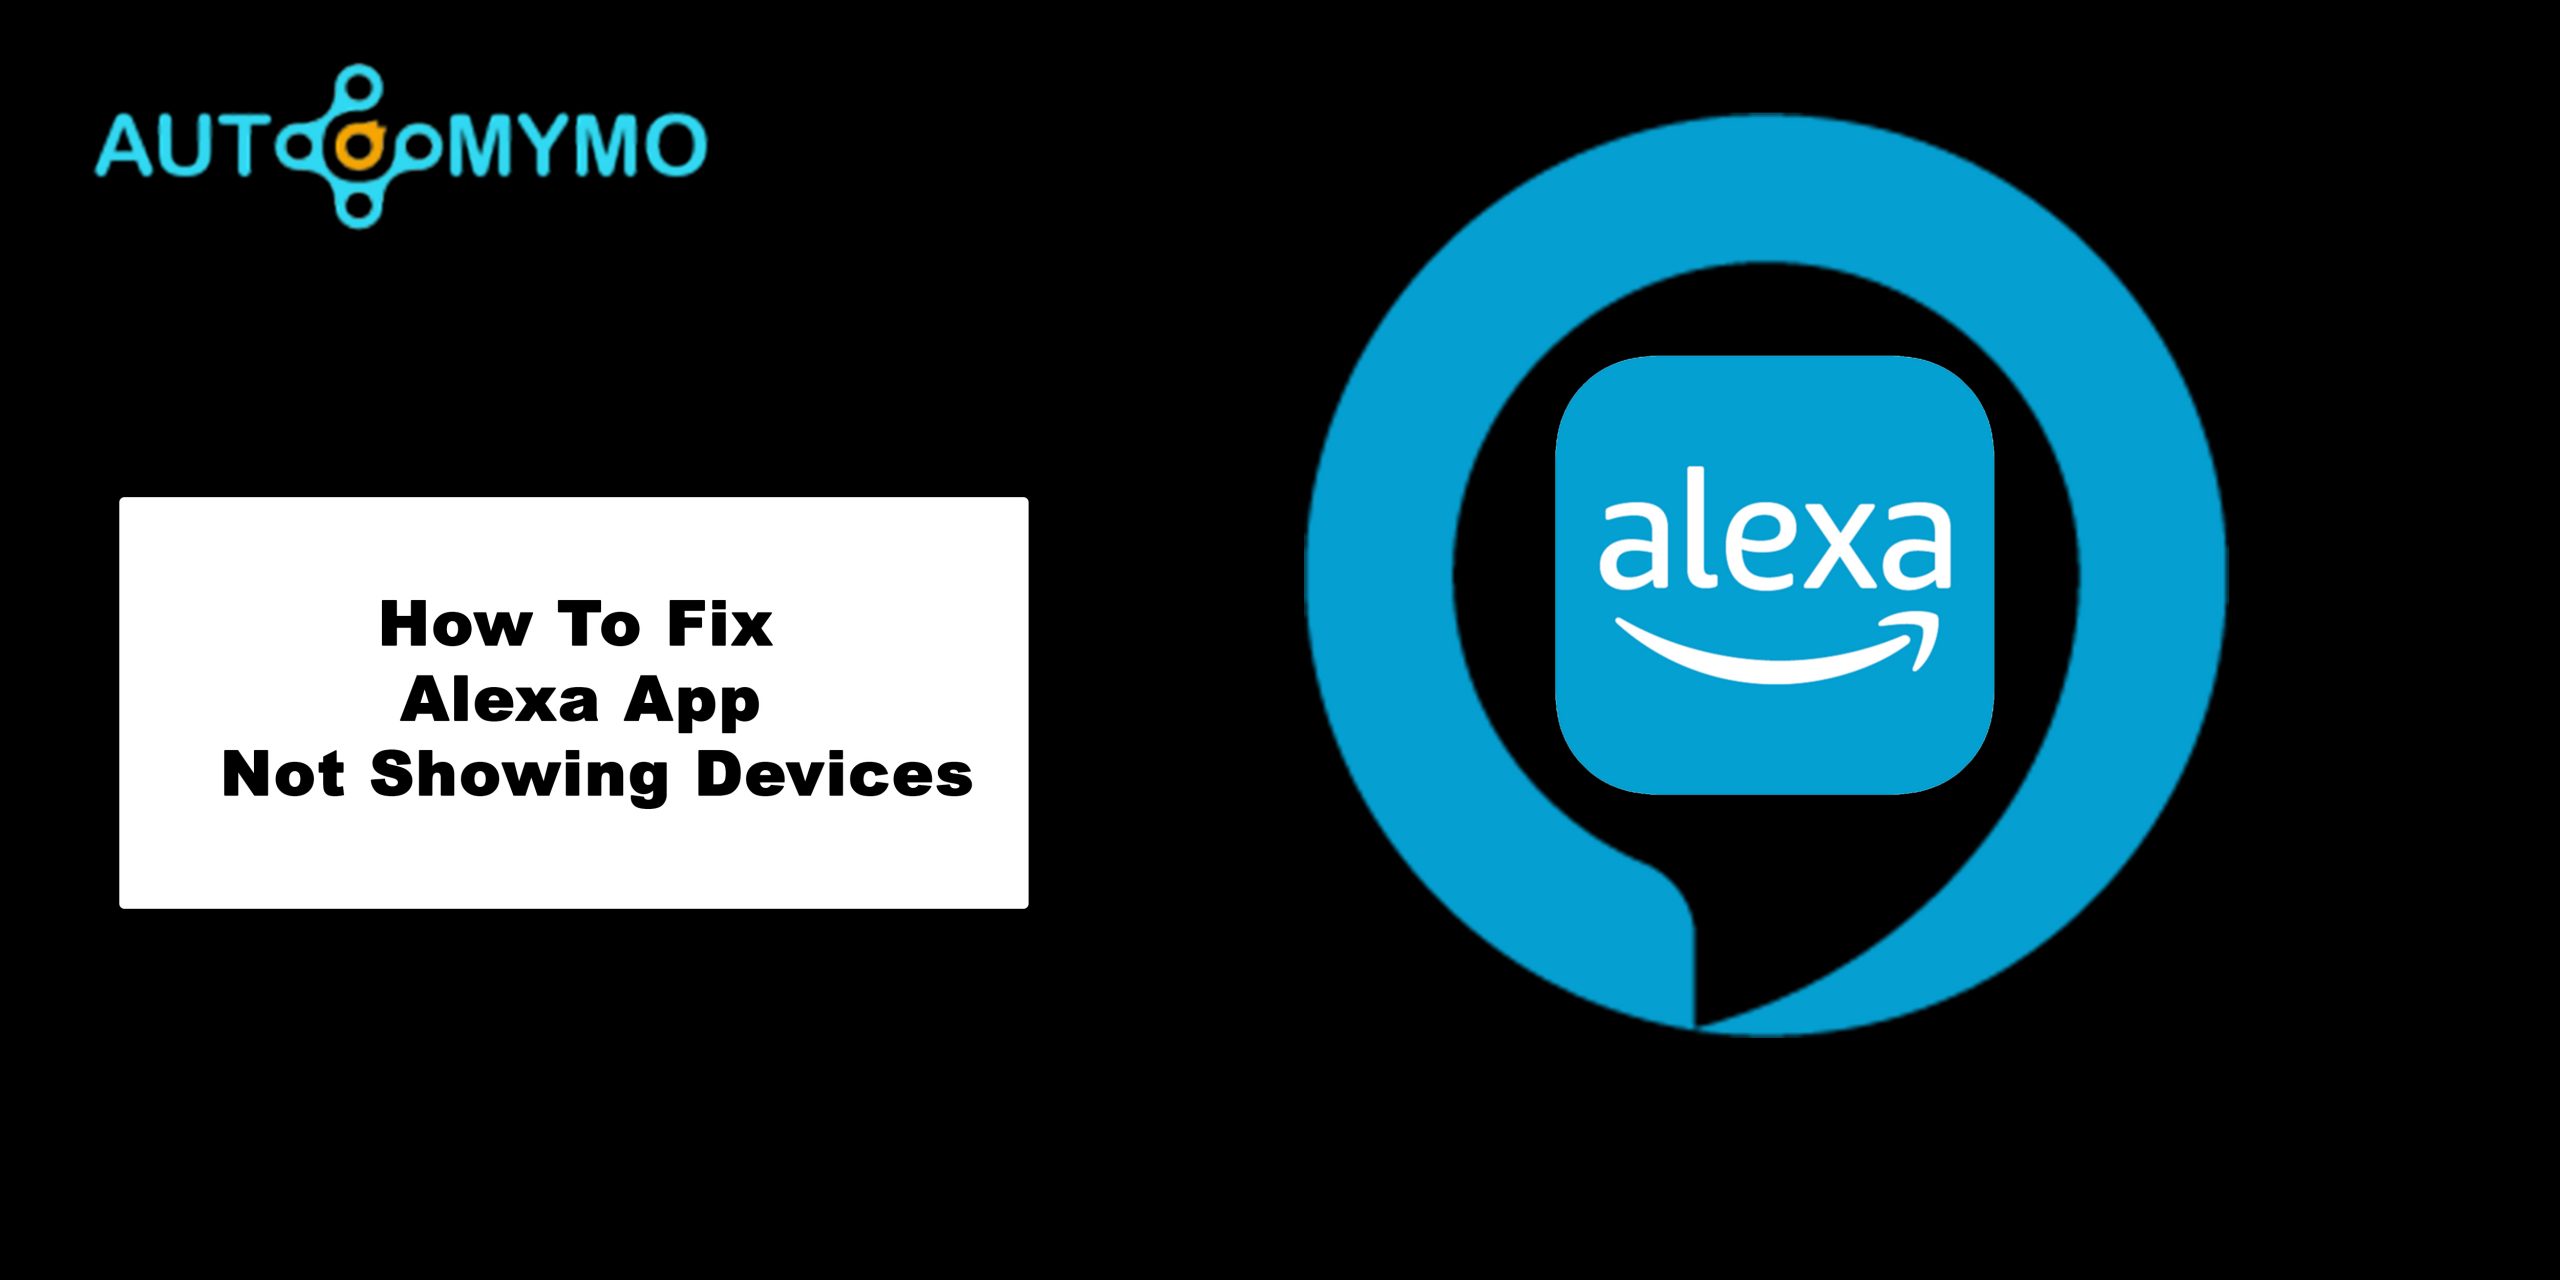 How To Fix Alexa App Not Showing Devices